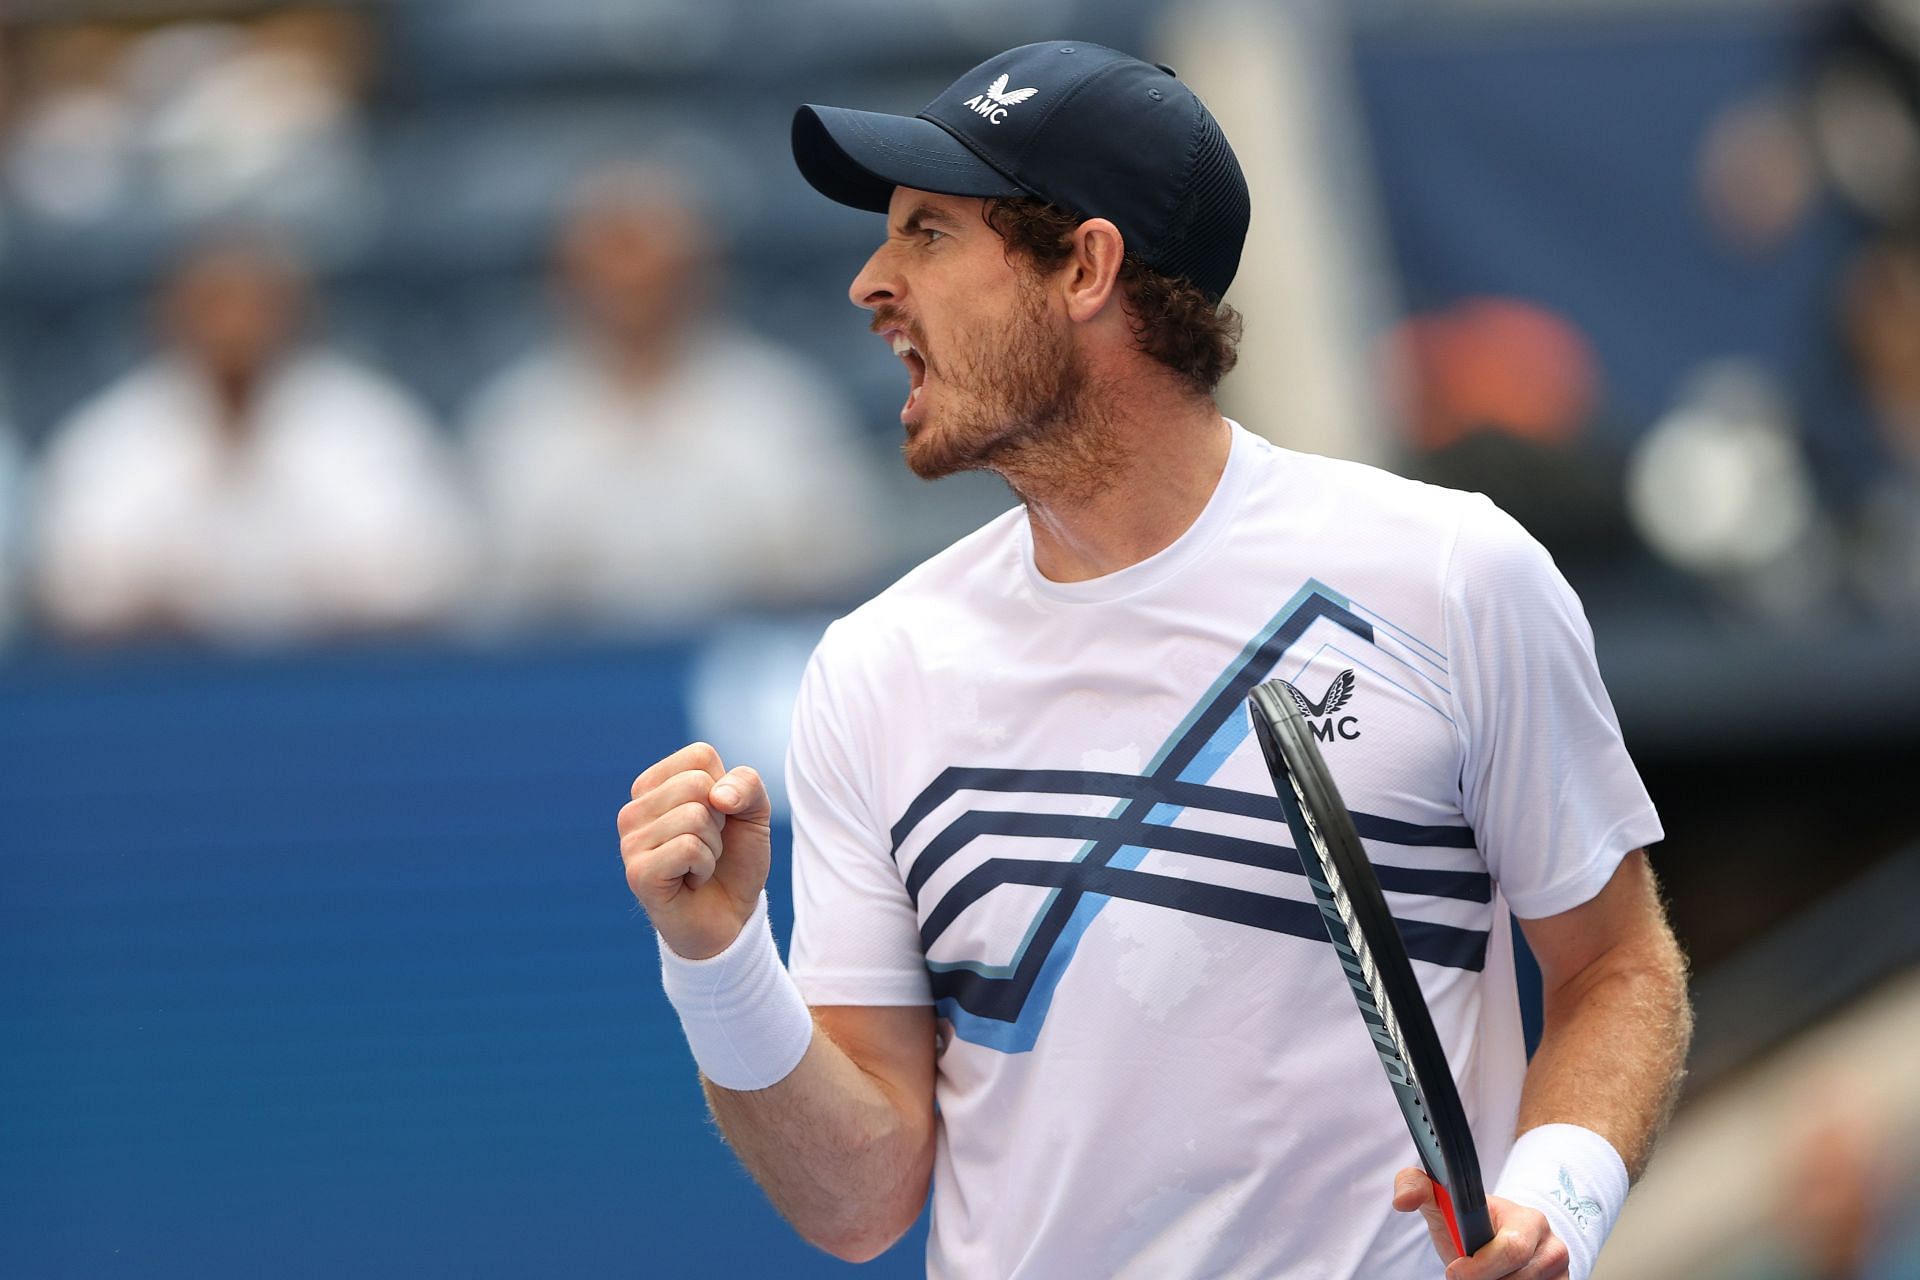 Murray celebrates a point at the 2021 US Open.